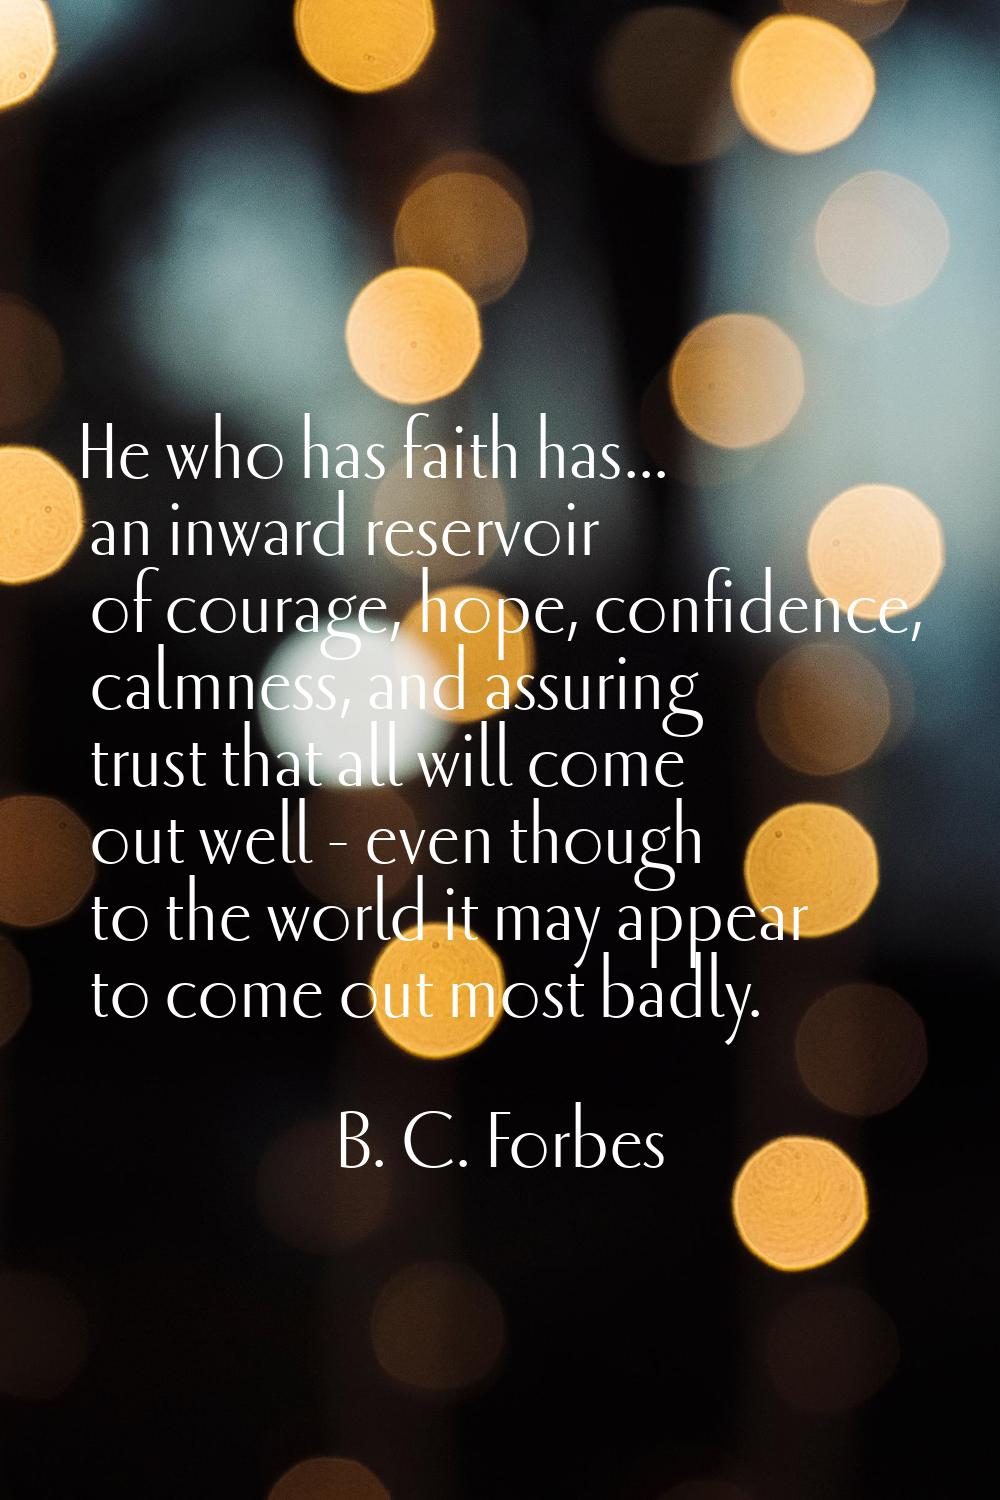 He who has faith has... an inward reservoir of courage, hope, confidence, calmness, and assuring tr